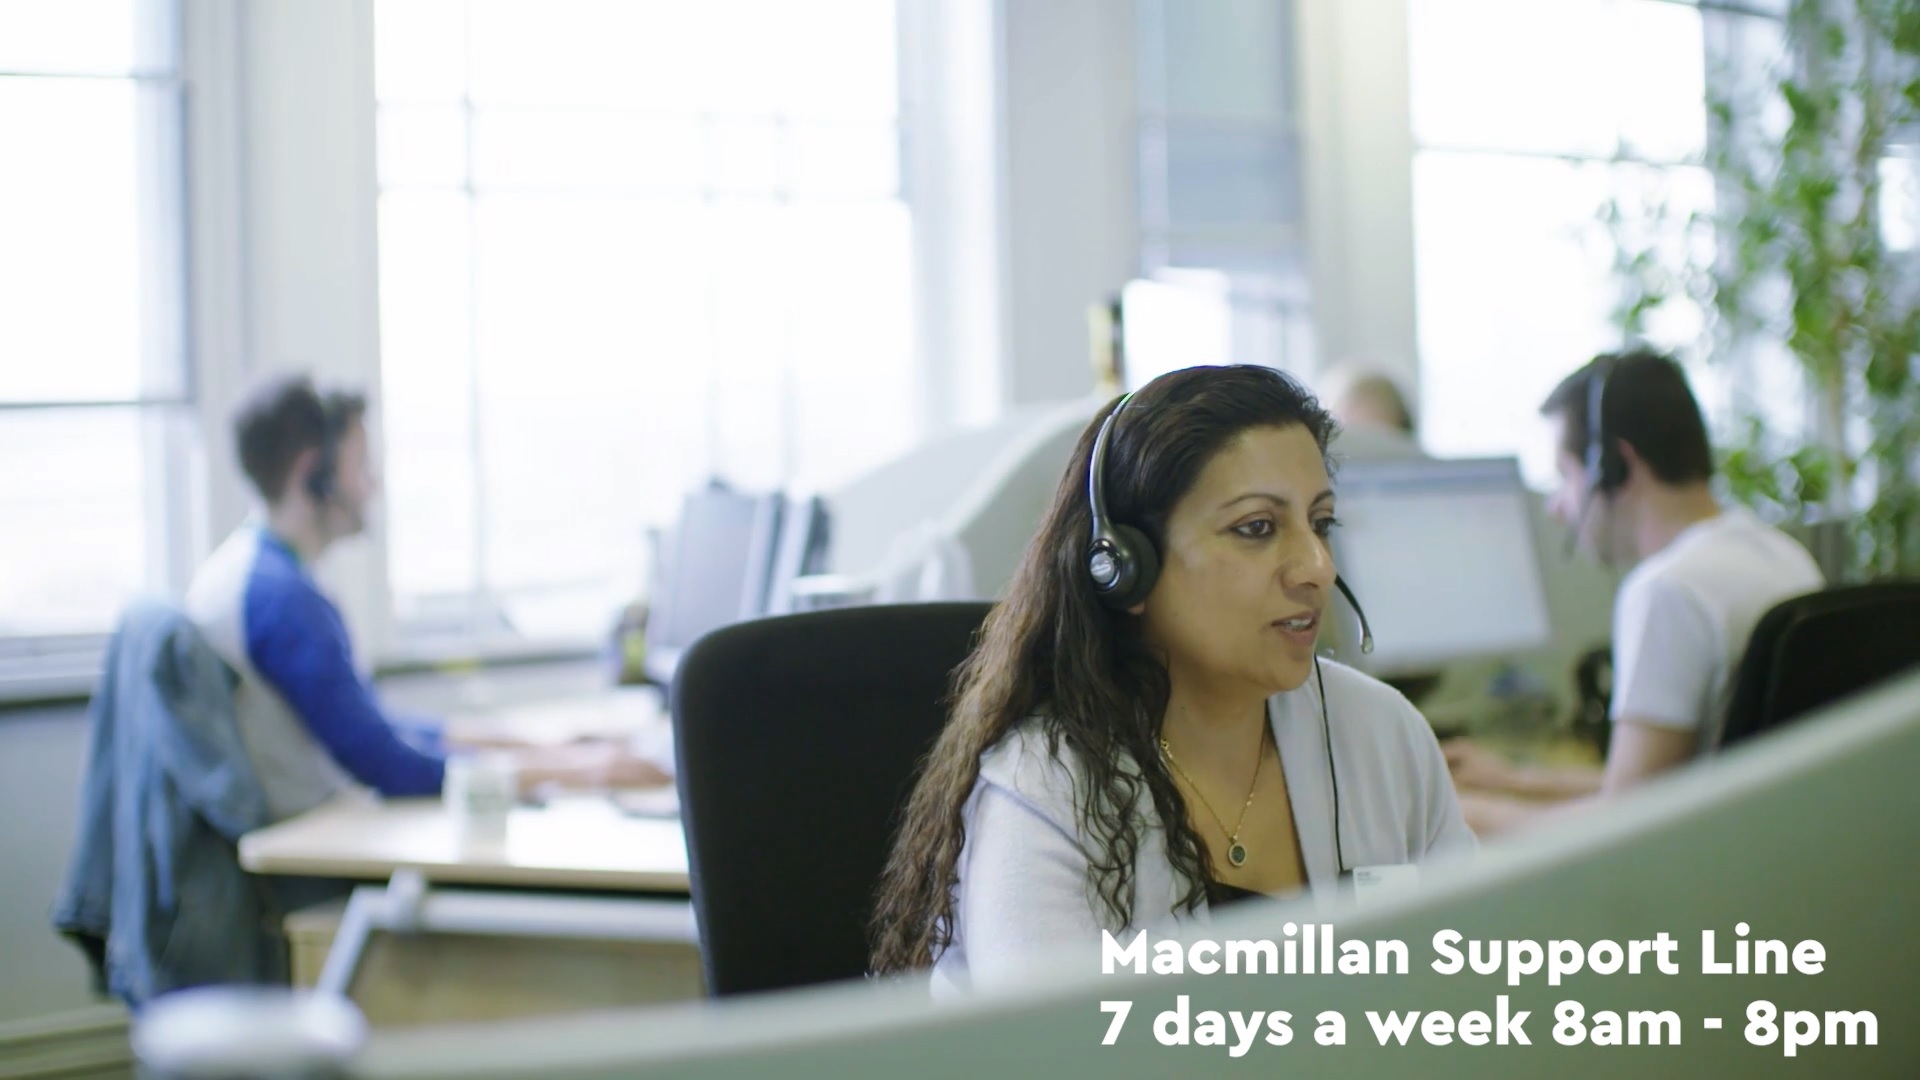 Maria, a Macmillan Cancer Information and Support Advisor explains why the Macmillan Support Line is such an important and valuable service for people living with and affected by cancer, like Ravinder.